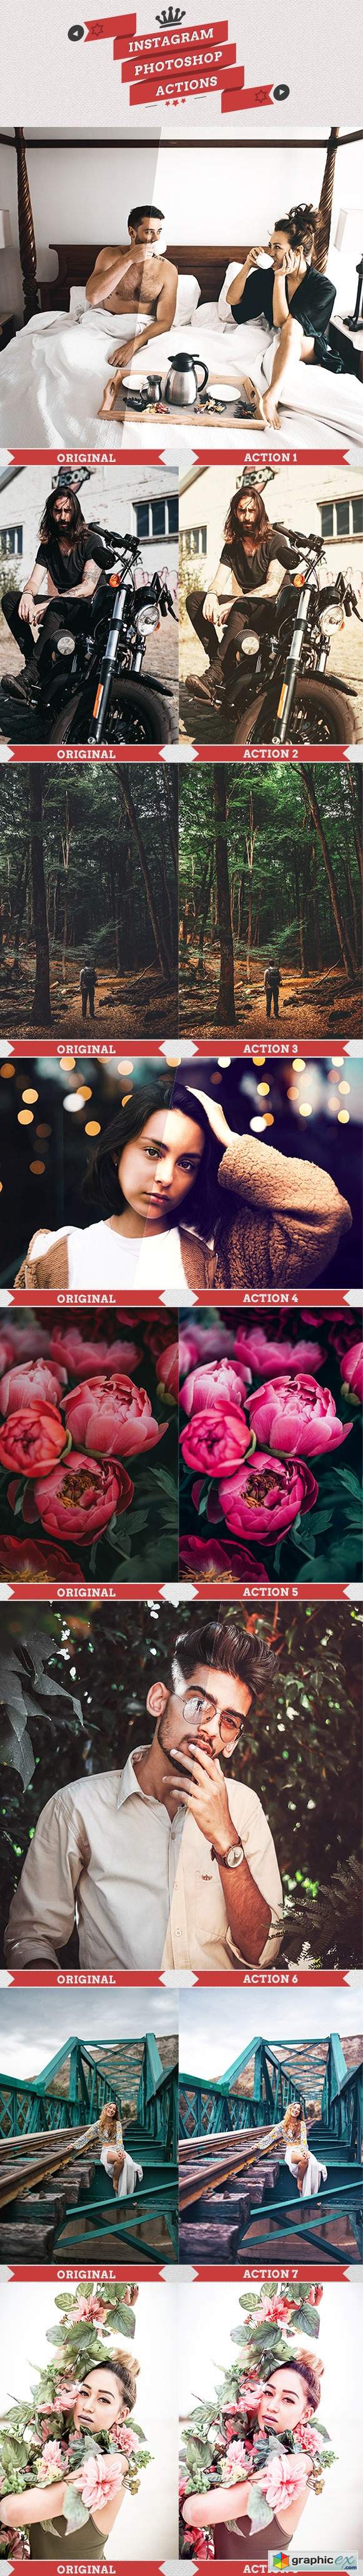 25 Instagram Filters Photoshop Actions